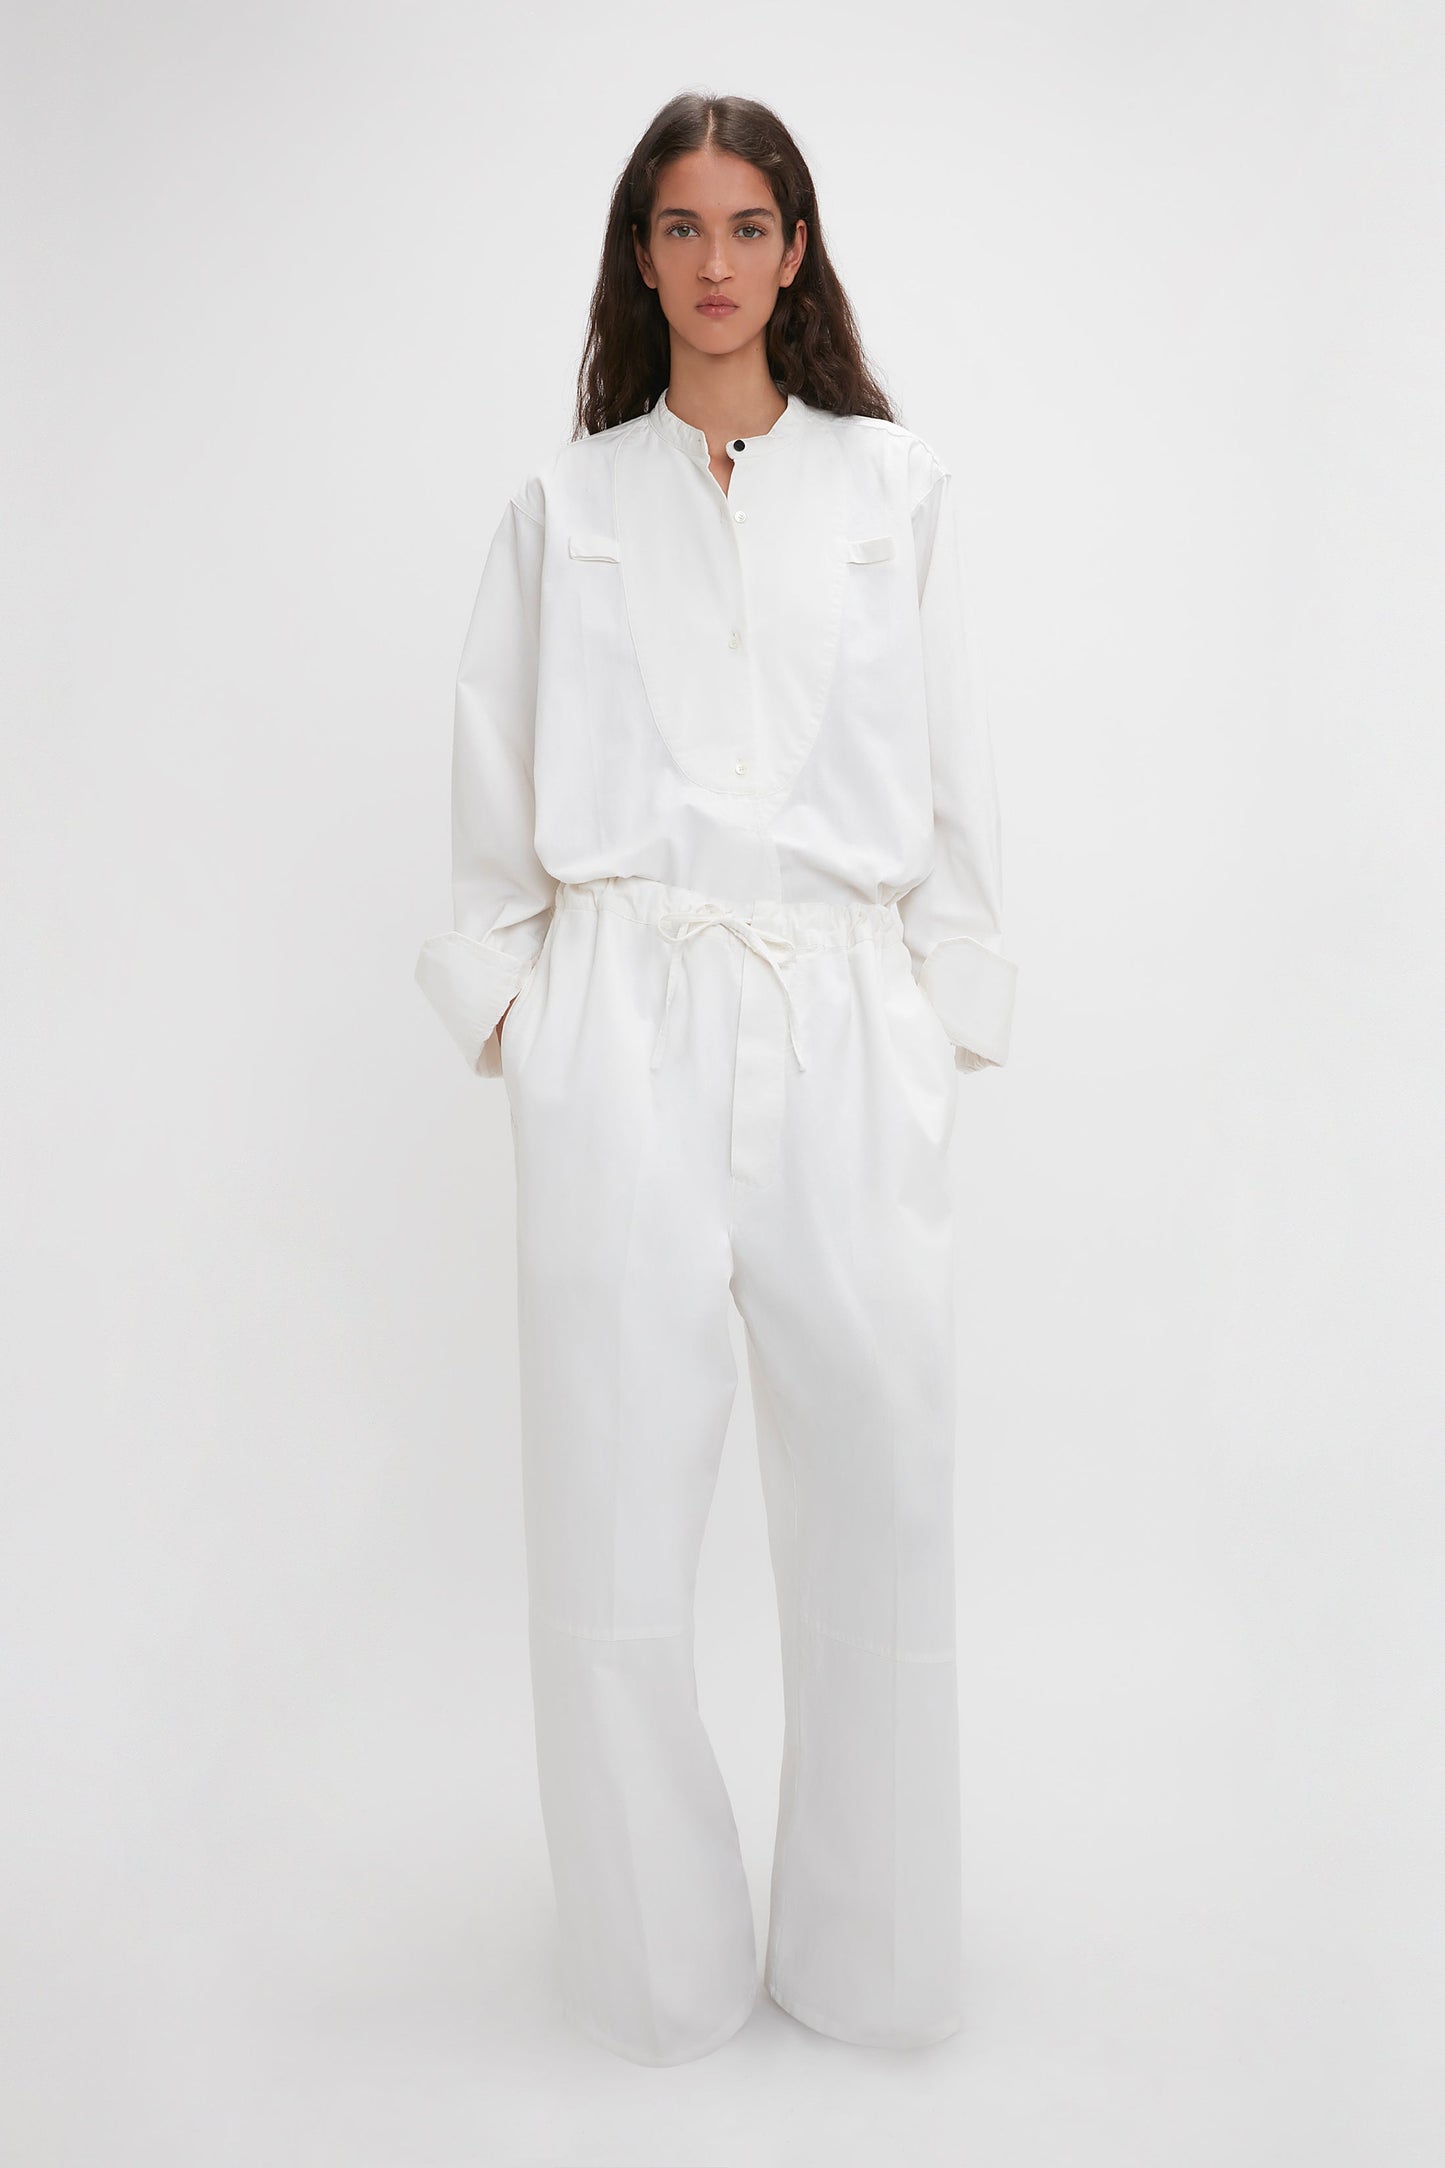 A woman in a white jumpsuit with an adjustable drawstring waistband stands against a plain background. 
    - A woman in Victoria Beckham Drawstring Pyjama Trouser In Washed White stands against a plain background.